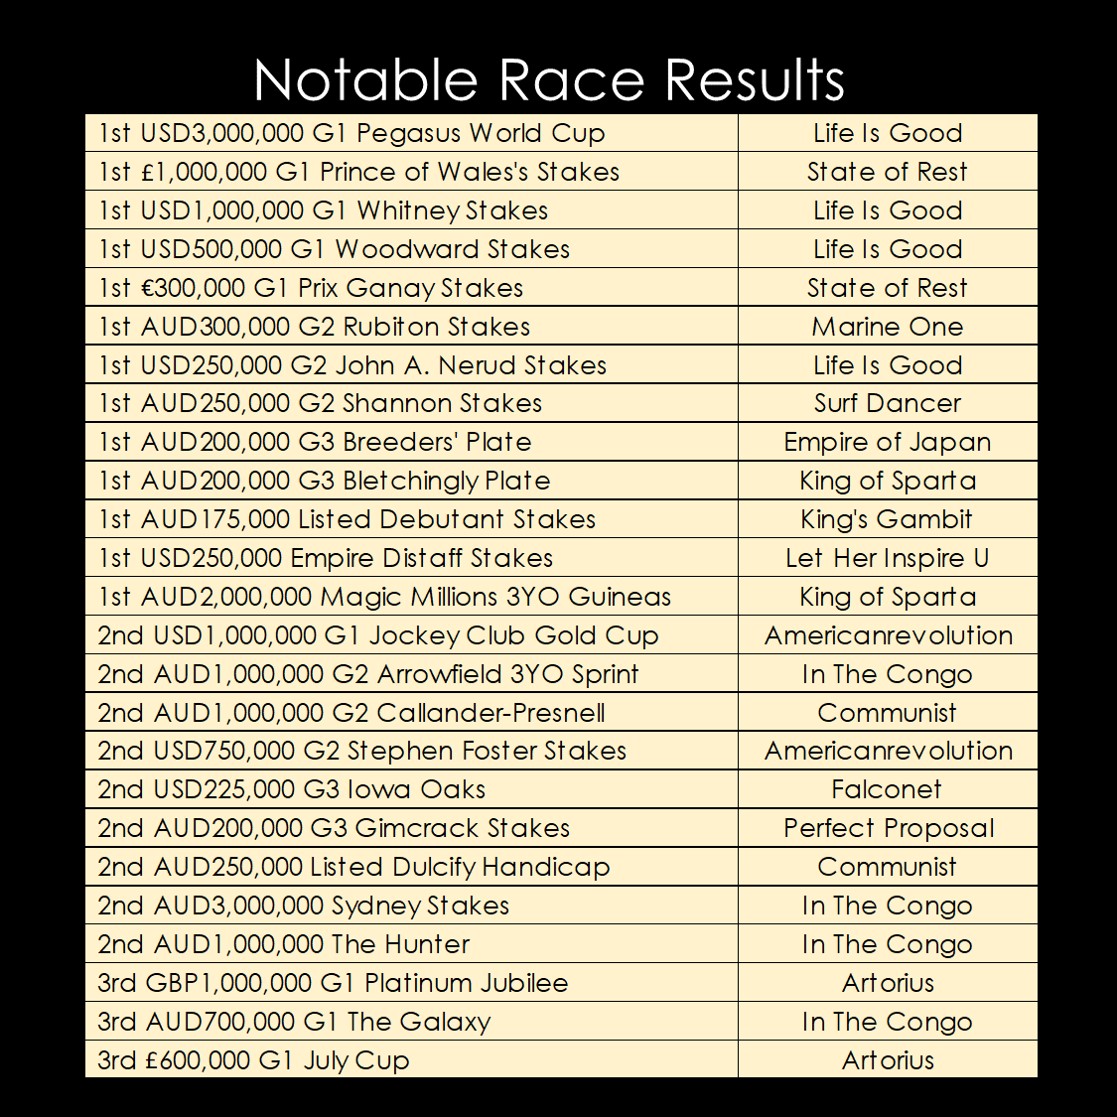 Notable Race Results